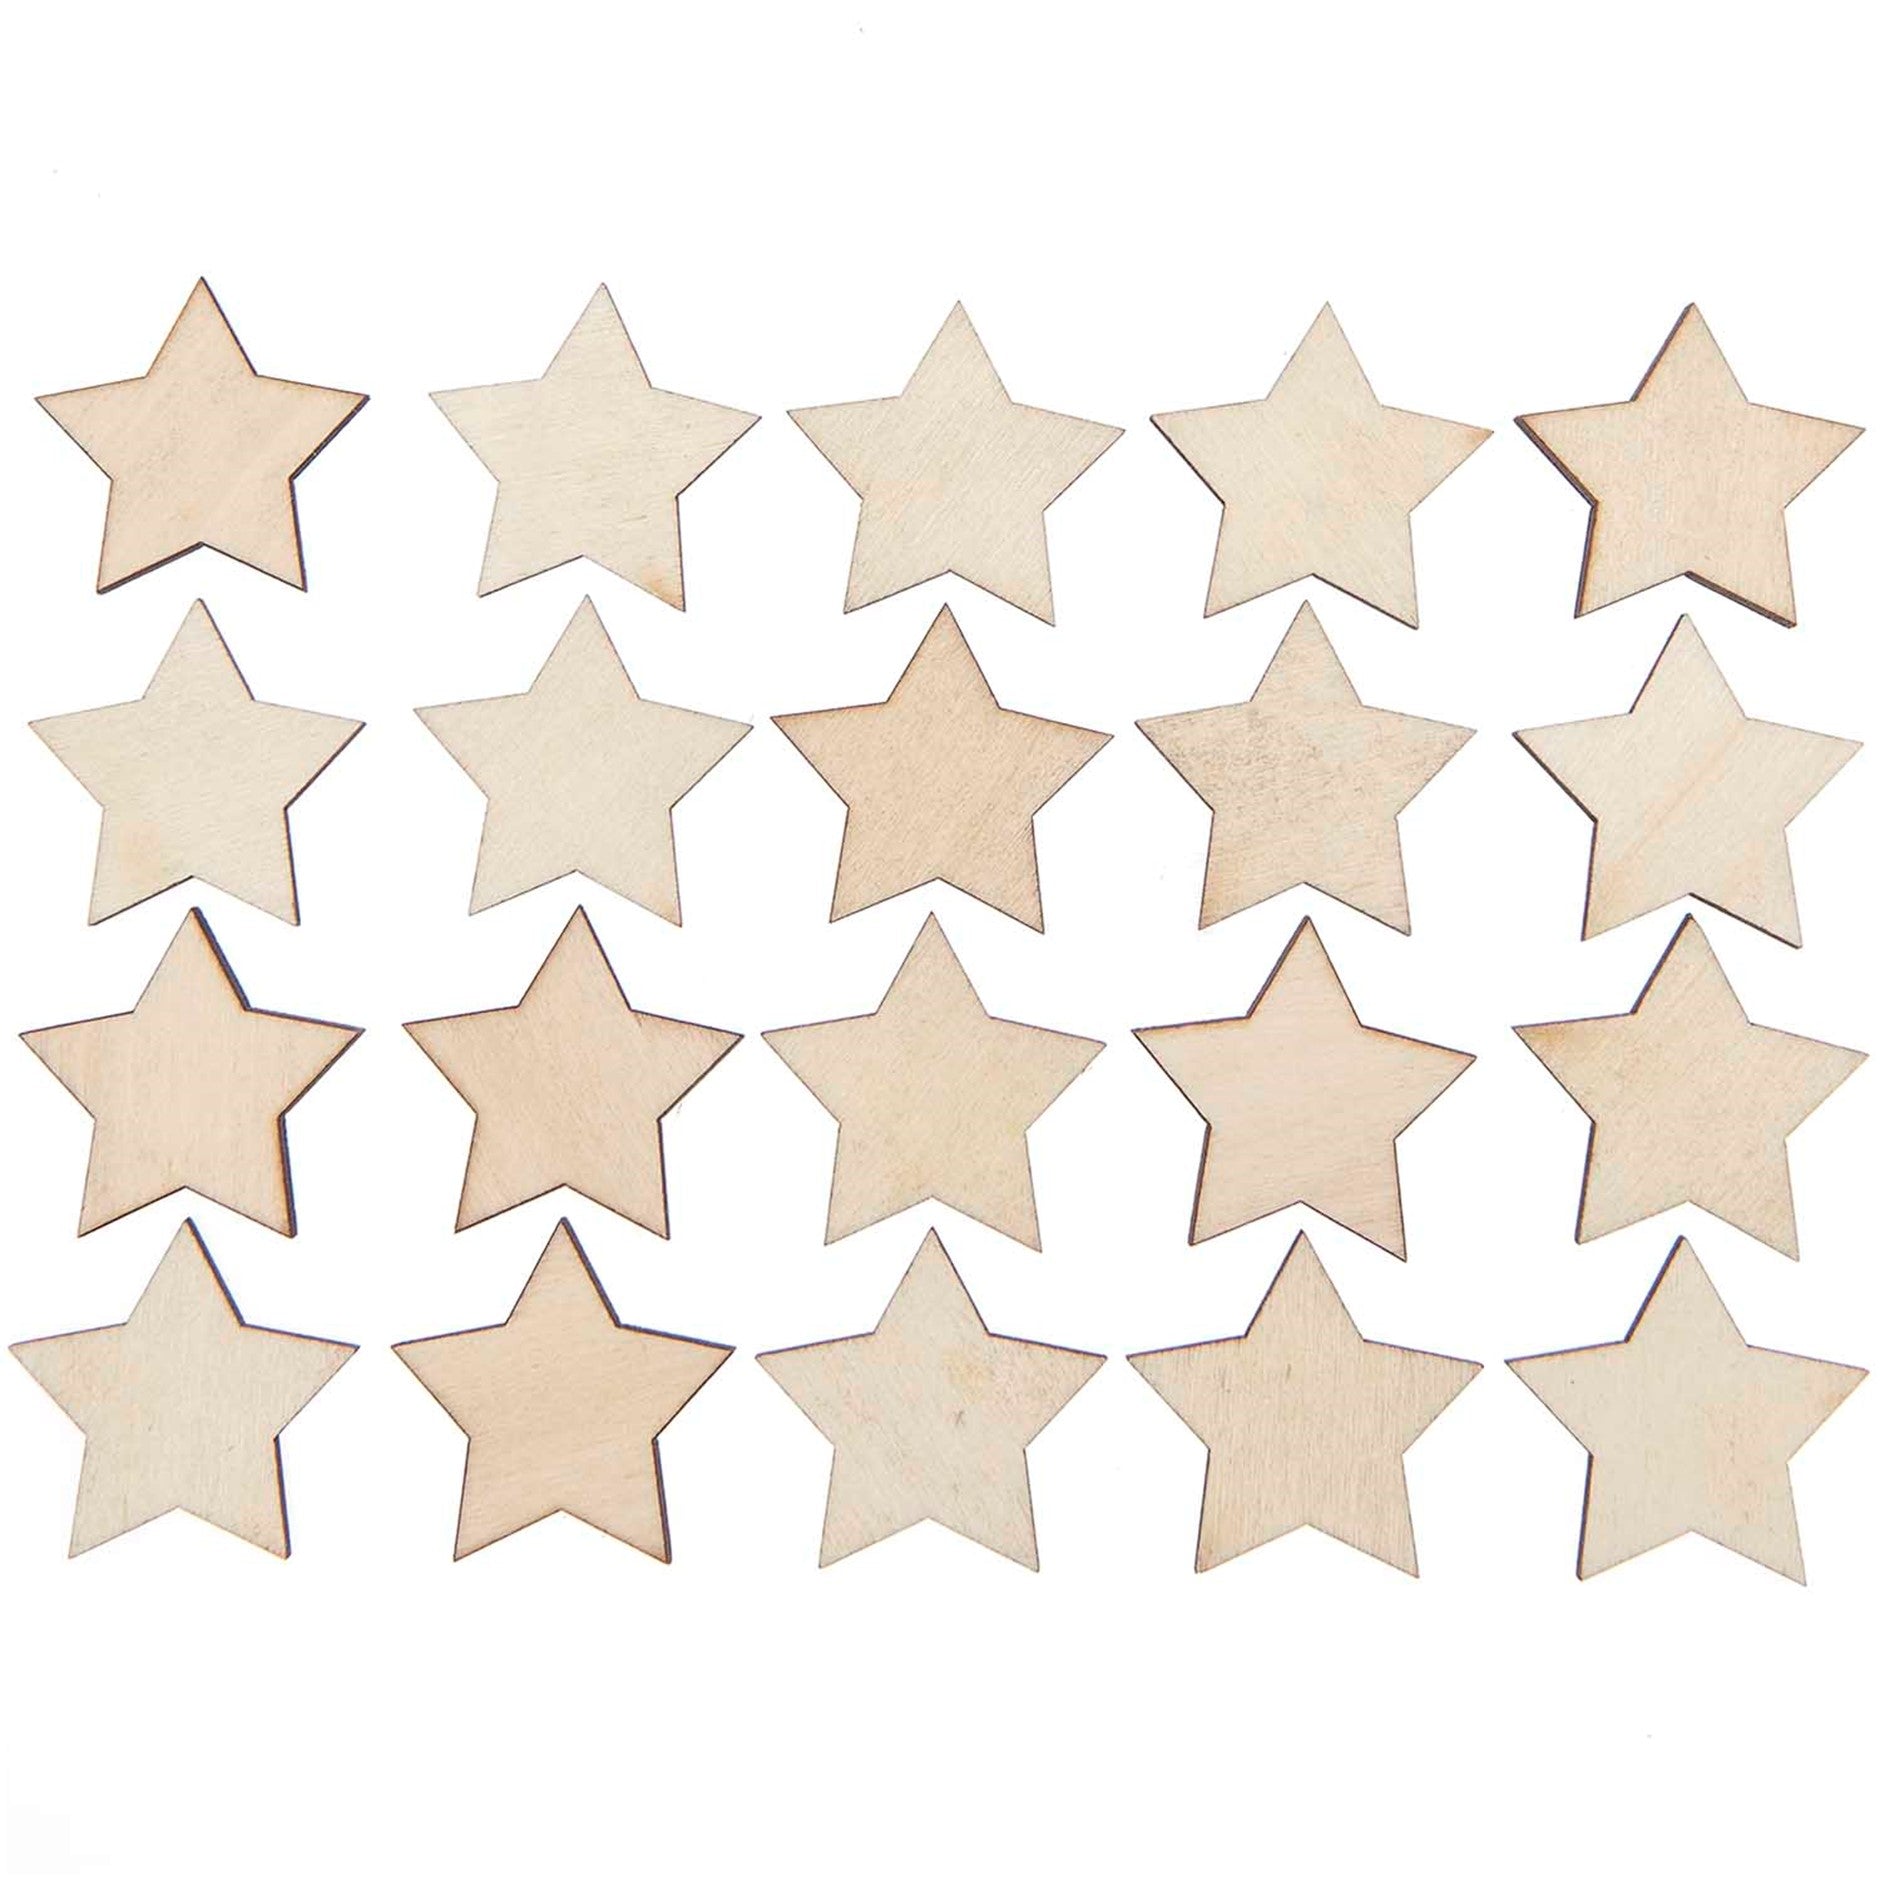 Wooden Stars Small - 20pc